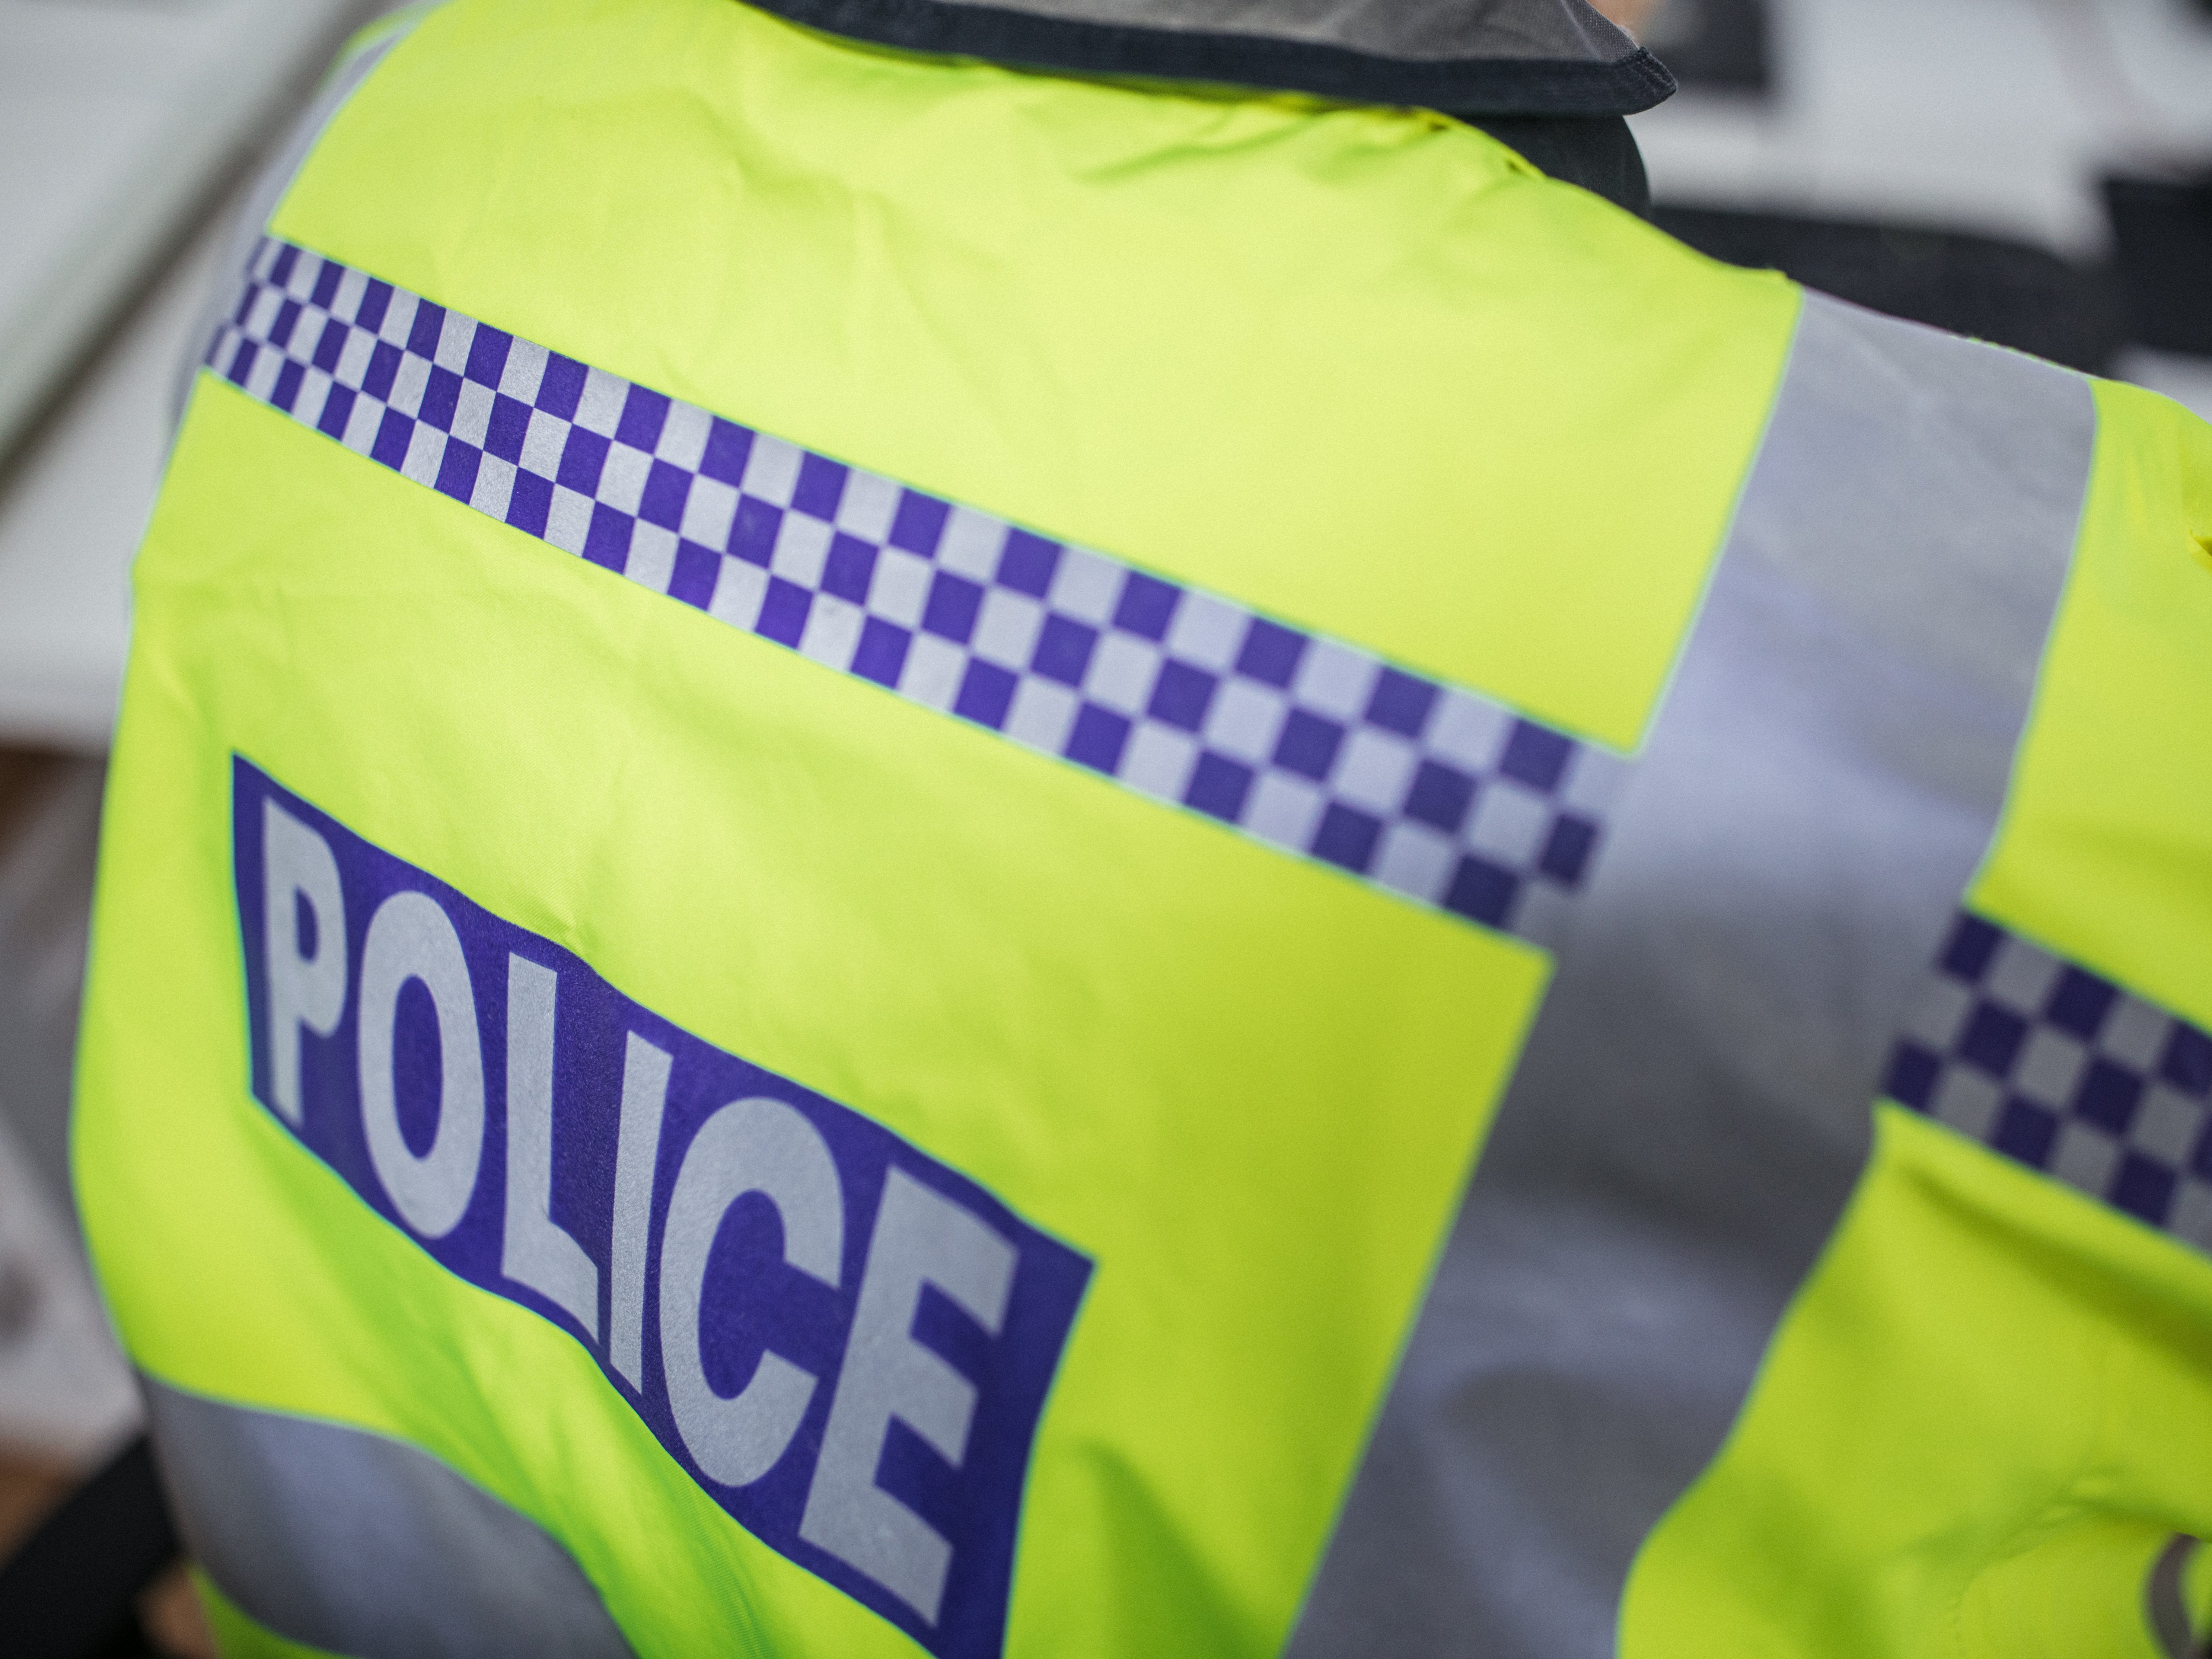 Police in Dorset broke up an illegal rave that had been going on for hours on Sunday